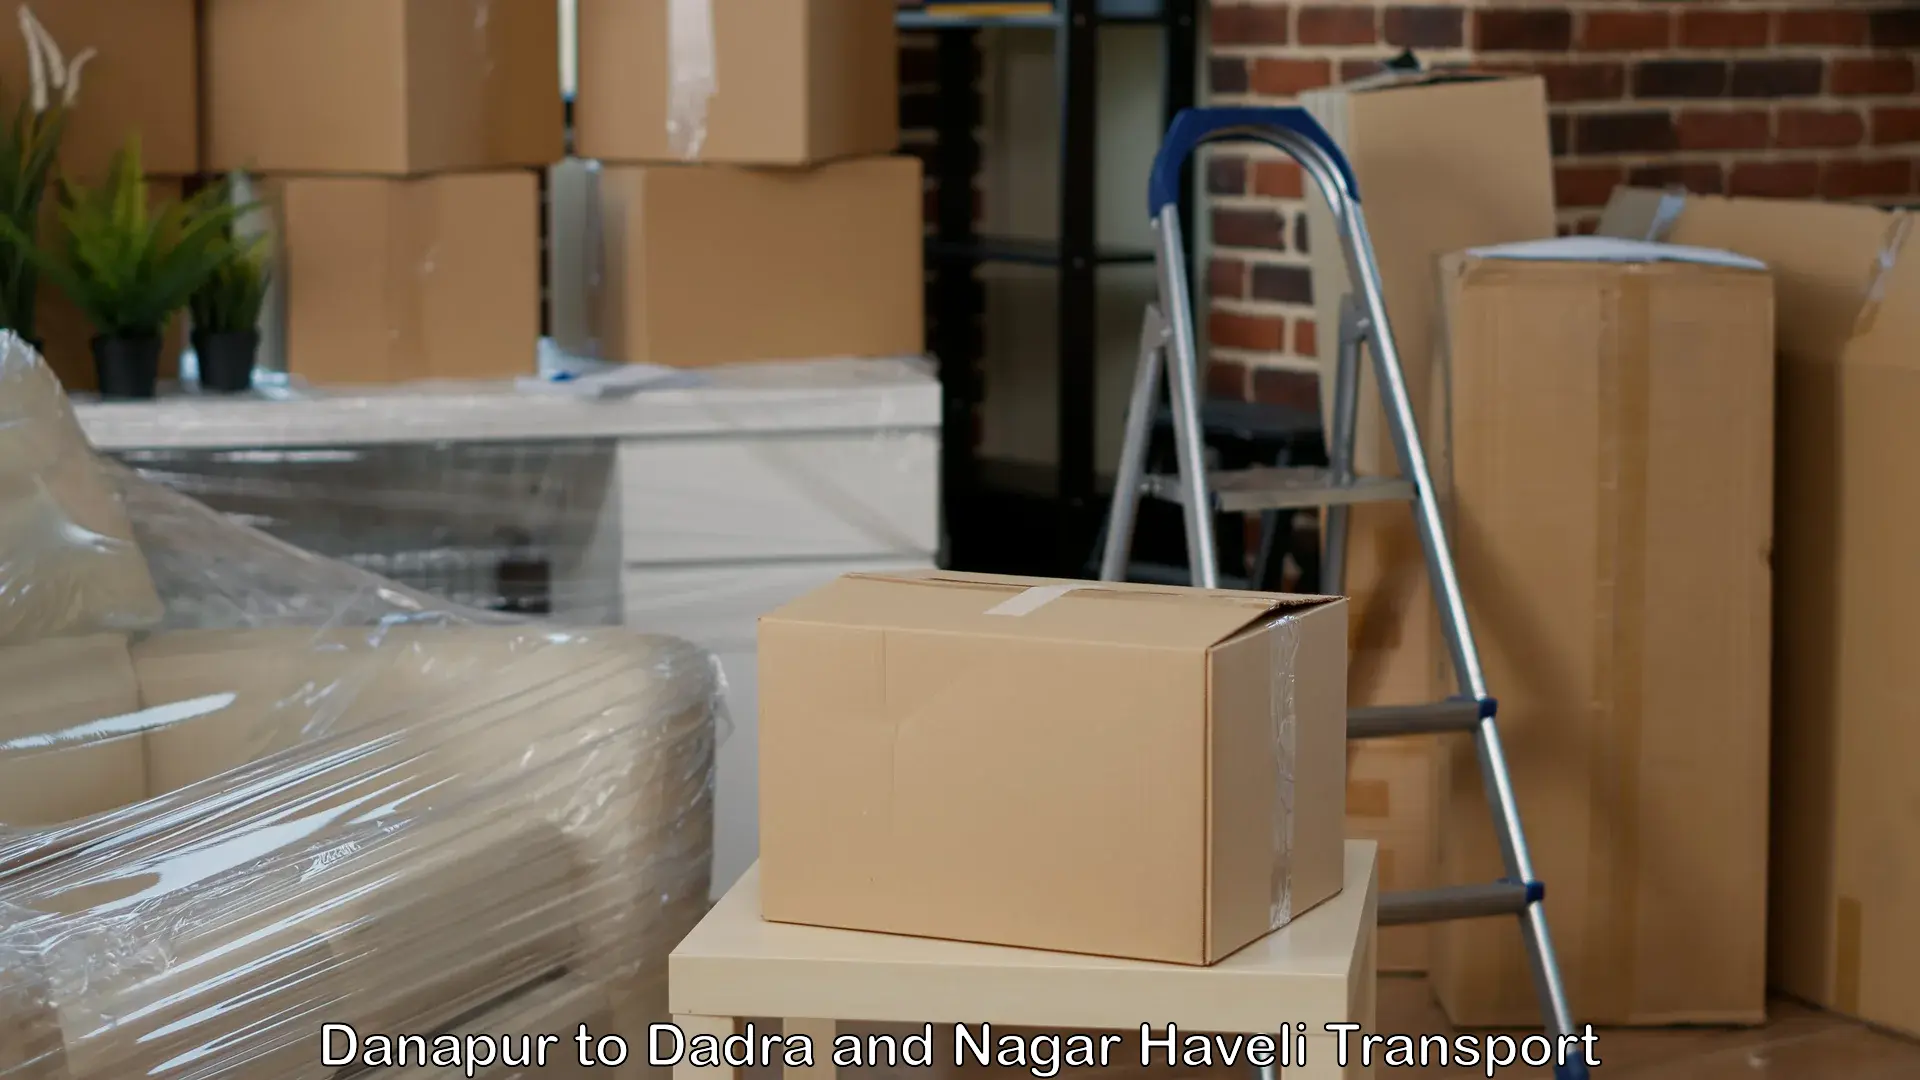 Domestic goods transportation services in Danapur to Dadra and Nagar Haveli